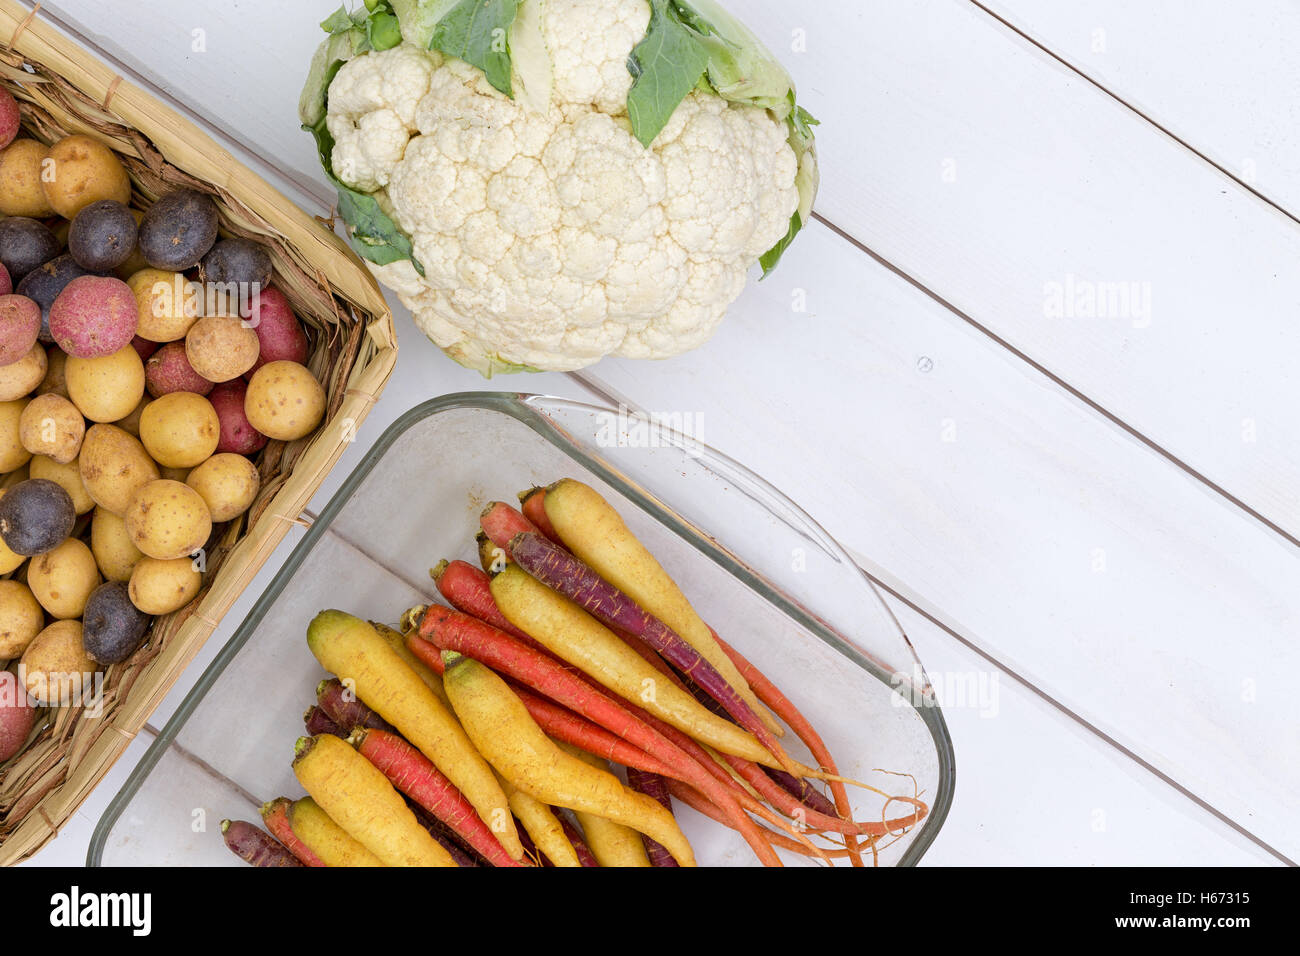 Raw cauliflower head beside purple, red and yellow carrots and potatoes over white wooden background Stock Photo